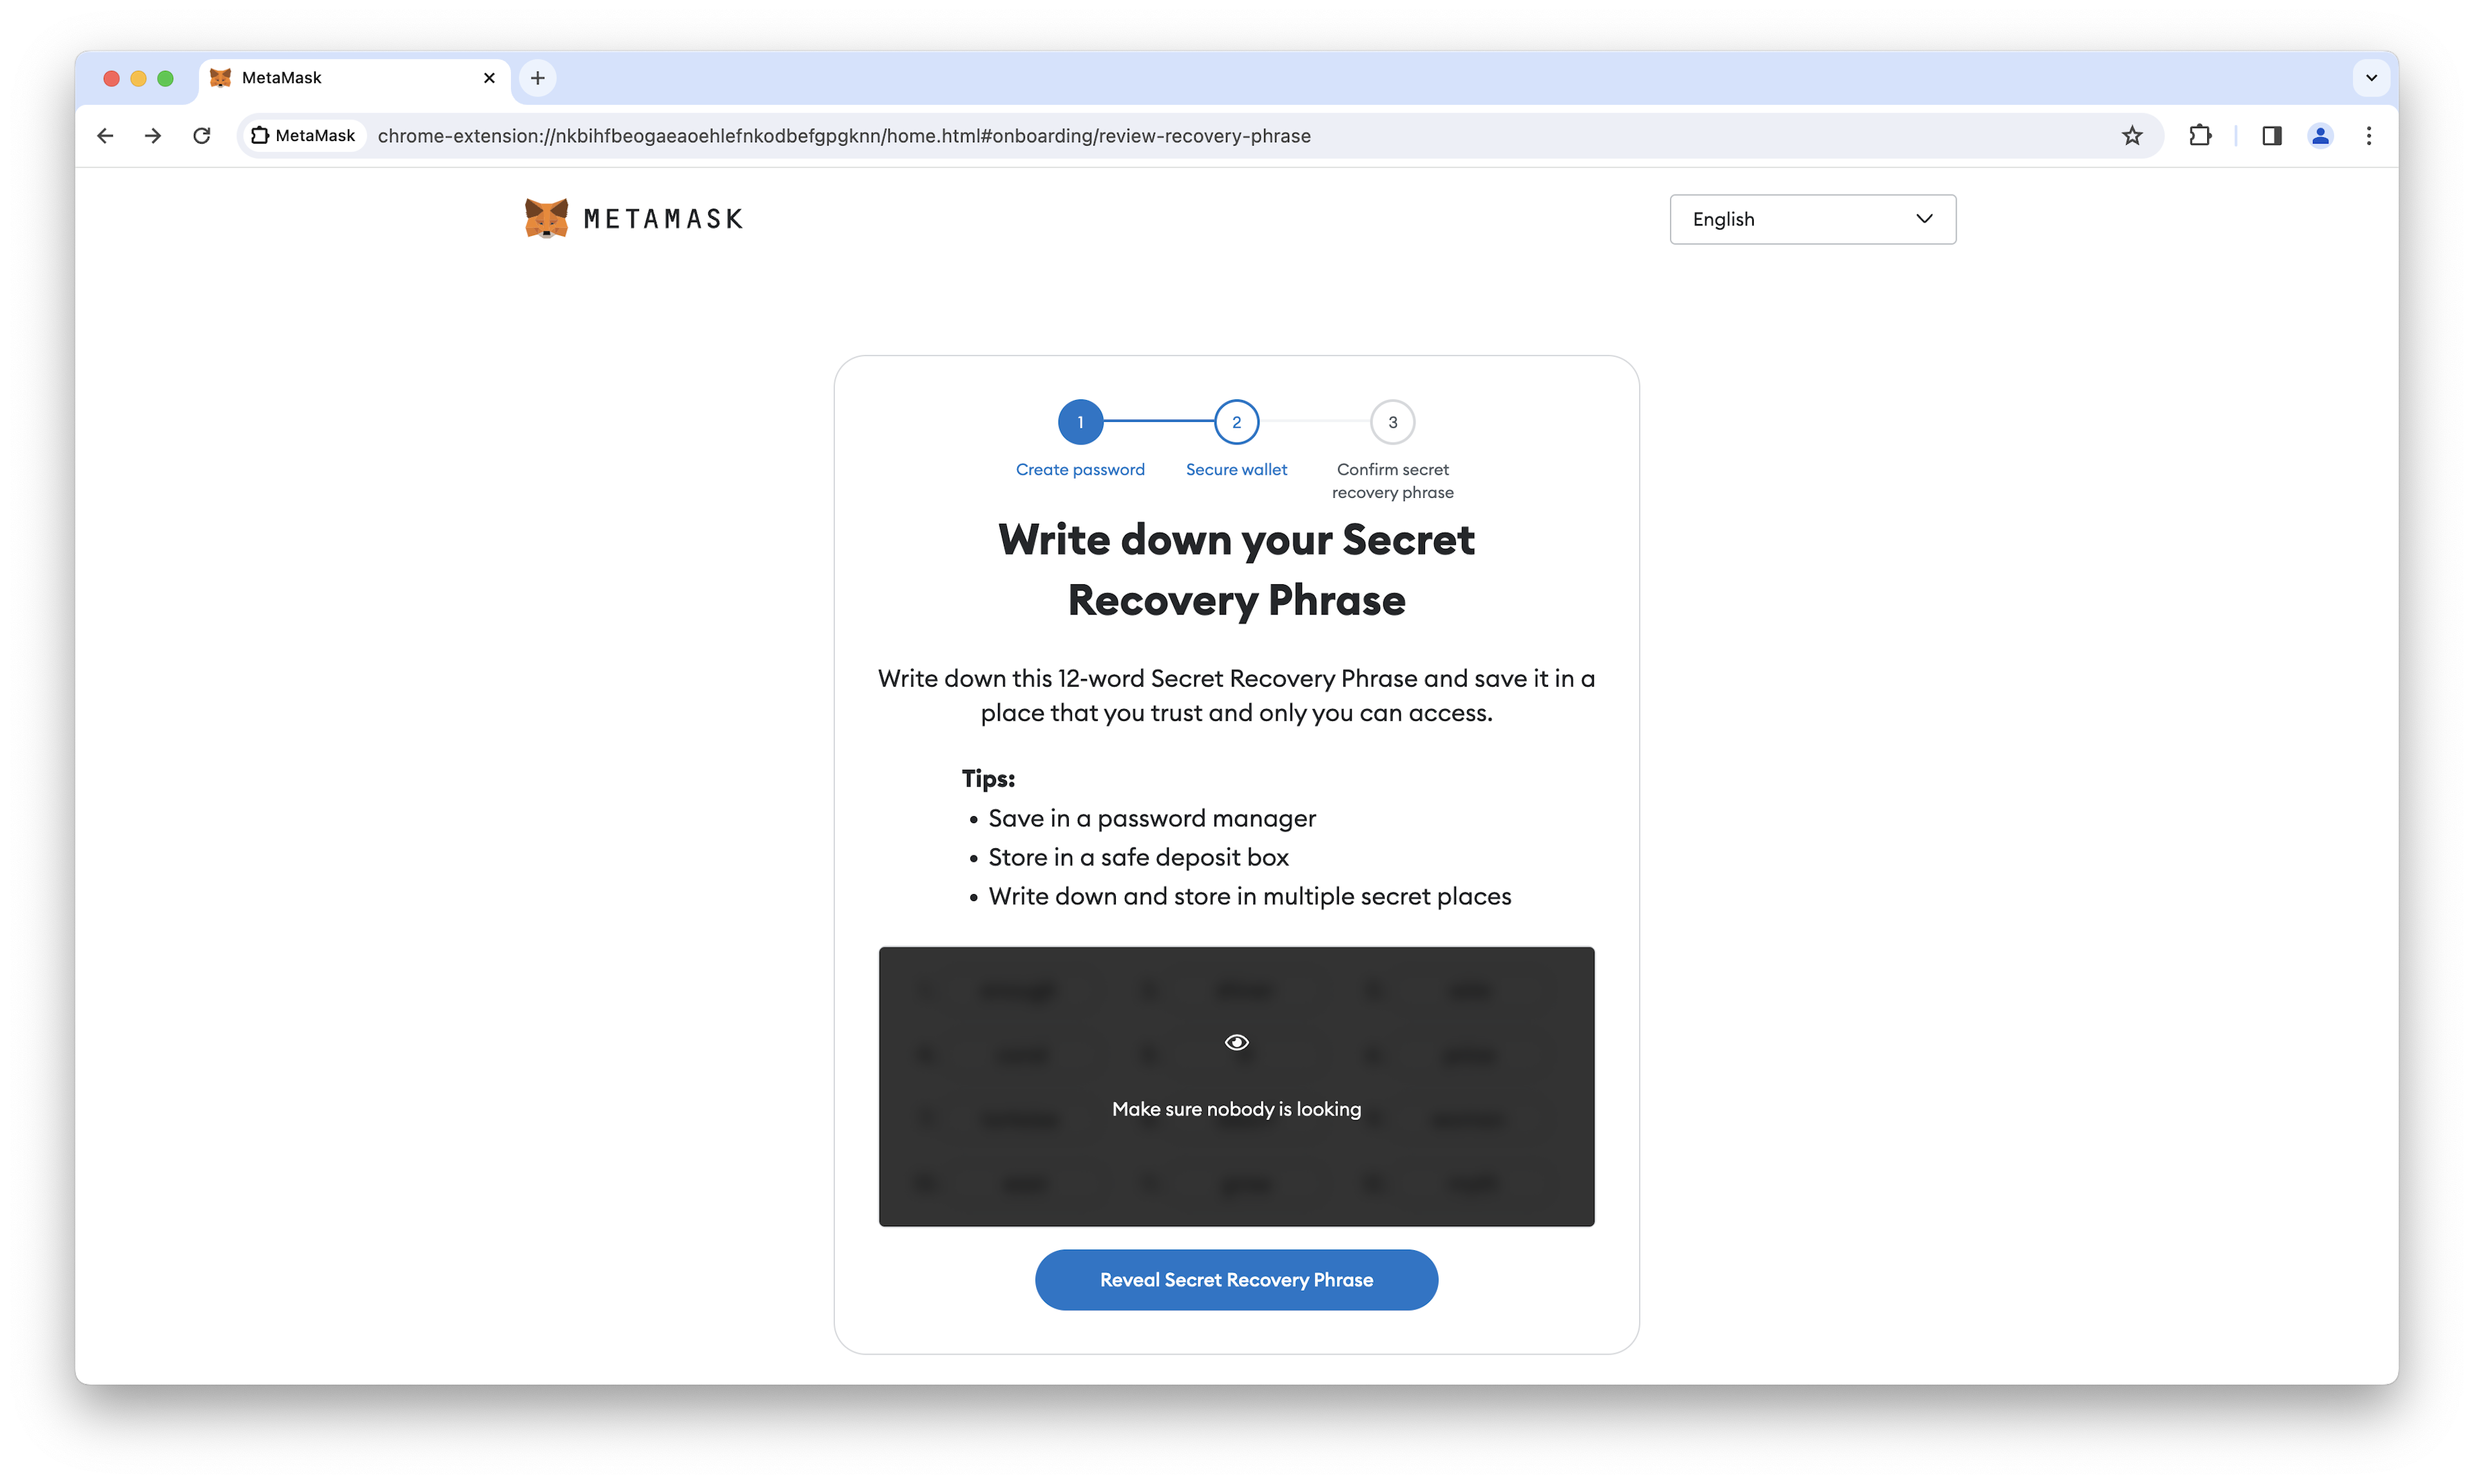 MetaMask recovery phrase page.